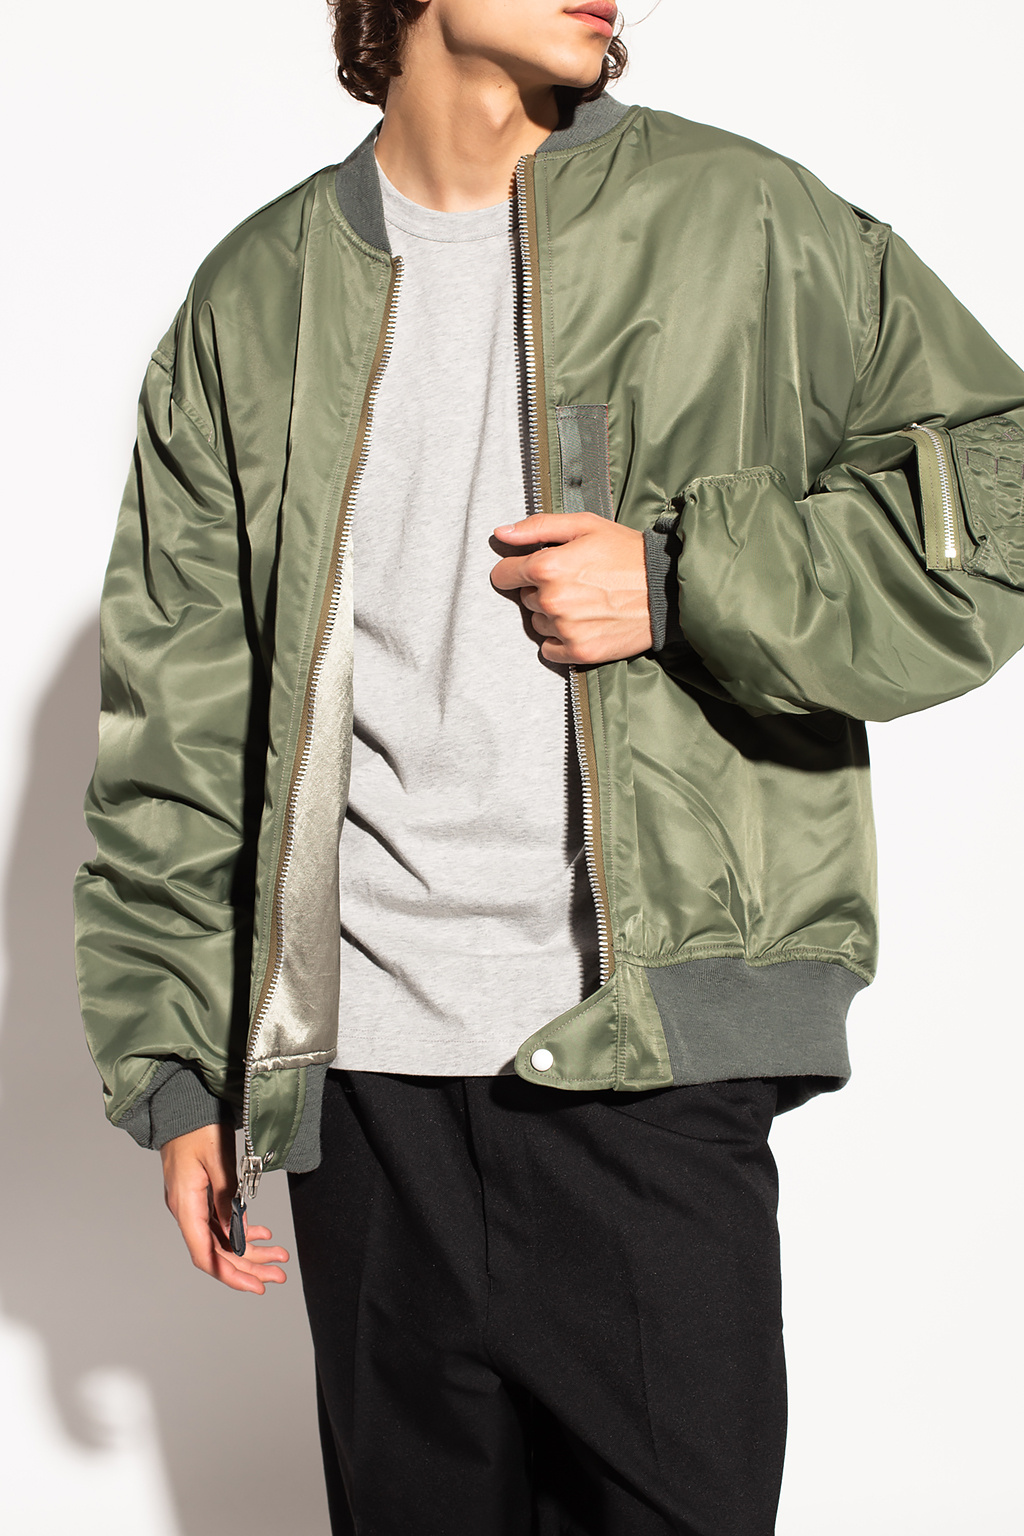 Re-Worked Clothing for Men Bomber jacket